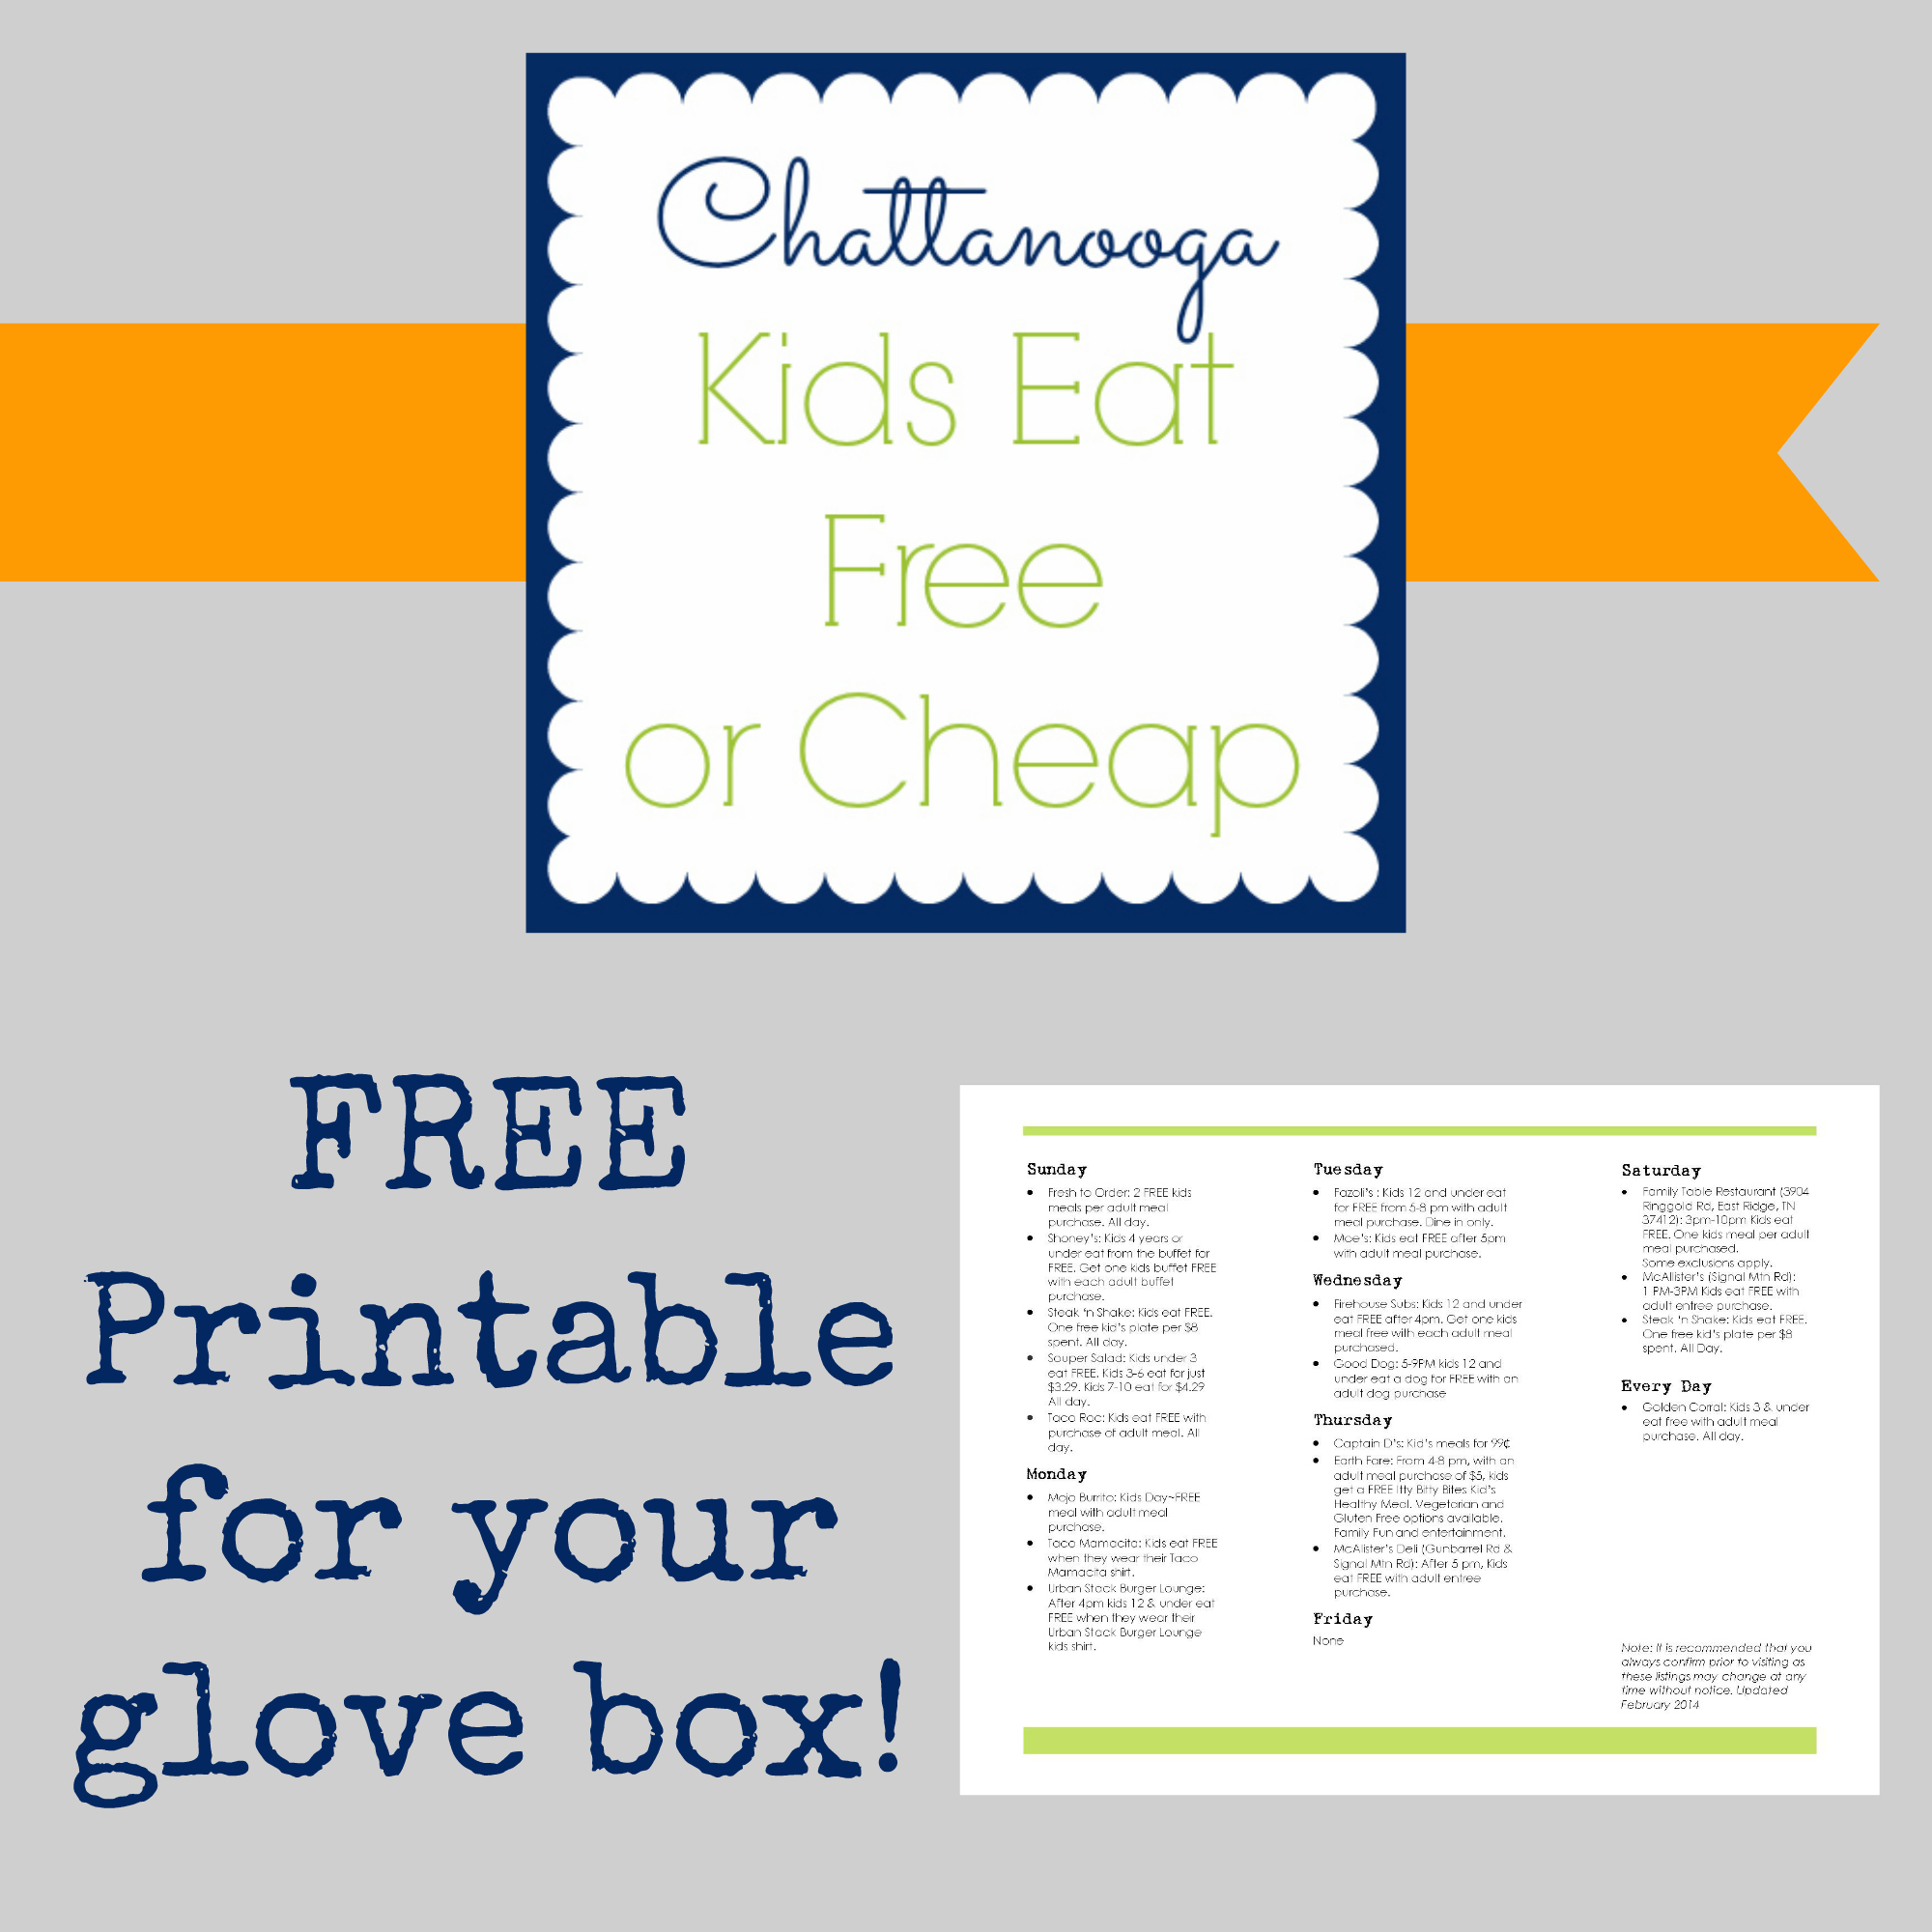 Free Printable Kids Eat Free or Cheap in Chattanooga list